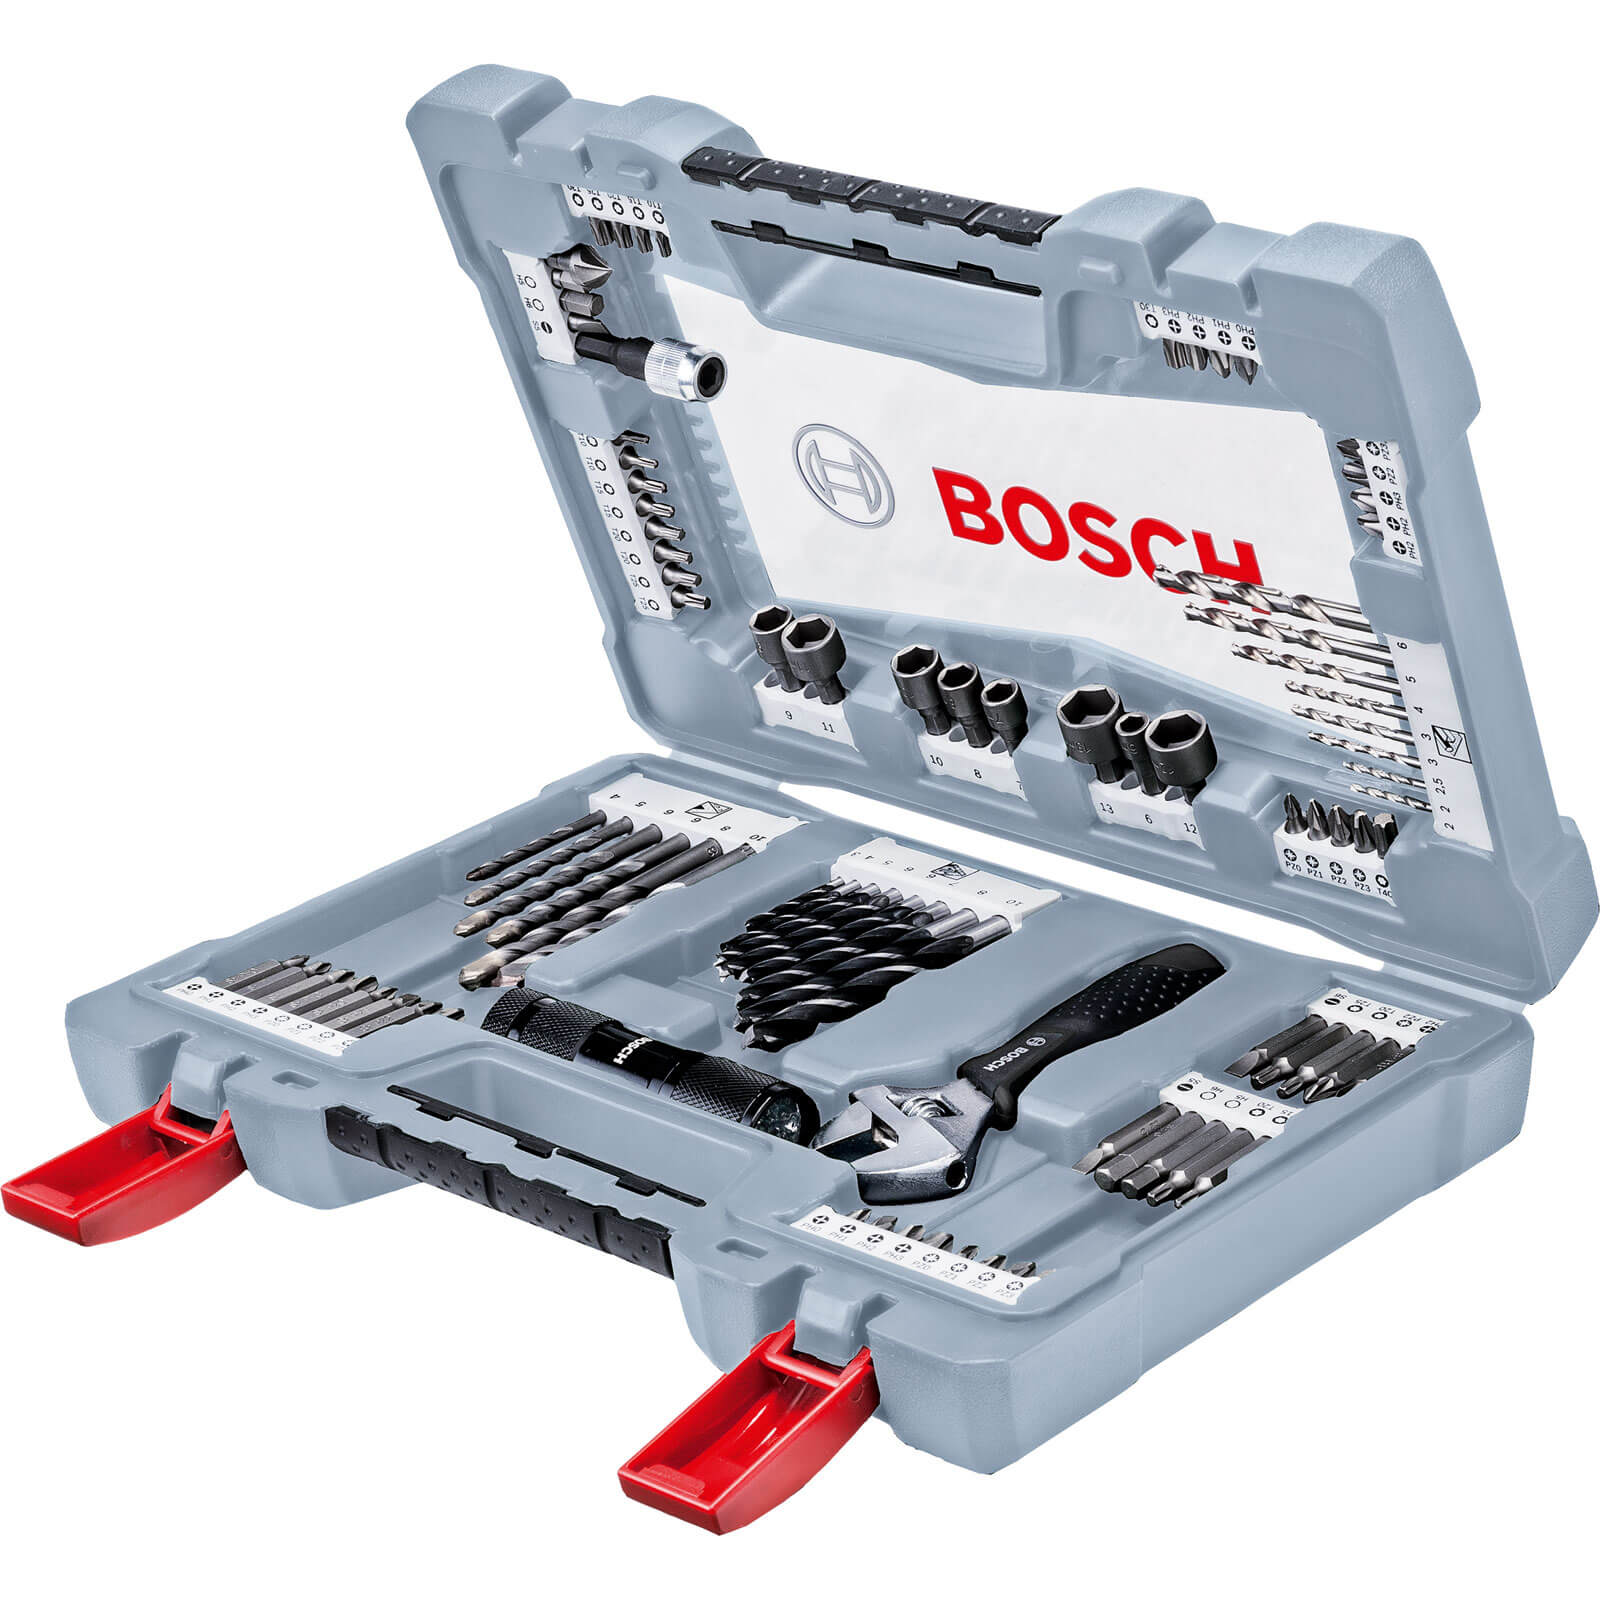 Image of Bosch 91 Piece Premium Power Tool Accessory Drill and Screwdriver Bit Set